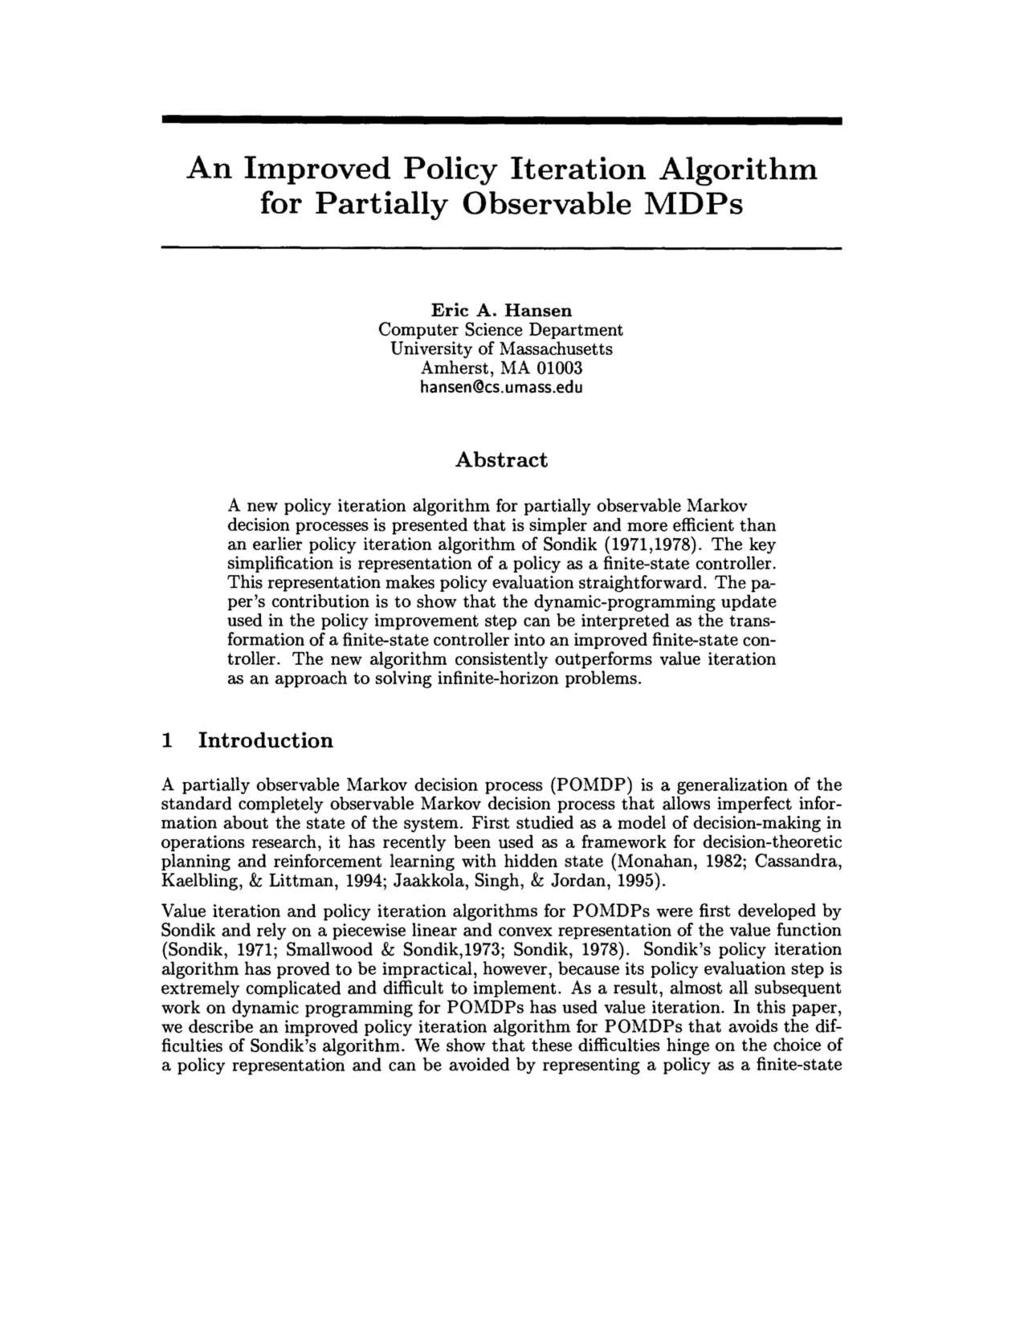 An Improved Policy Iteratioll Algorithm for Partially Observable MDPs Eric A. Hansen Computer Science Department University of Massachusetts Amherst, MA 01003 hansen@cs.umass.